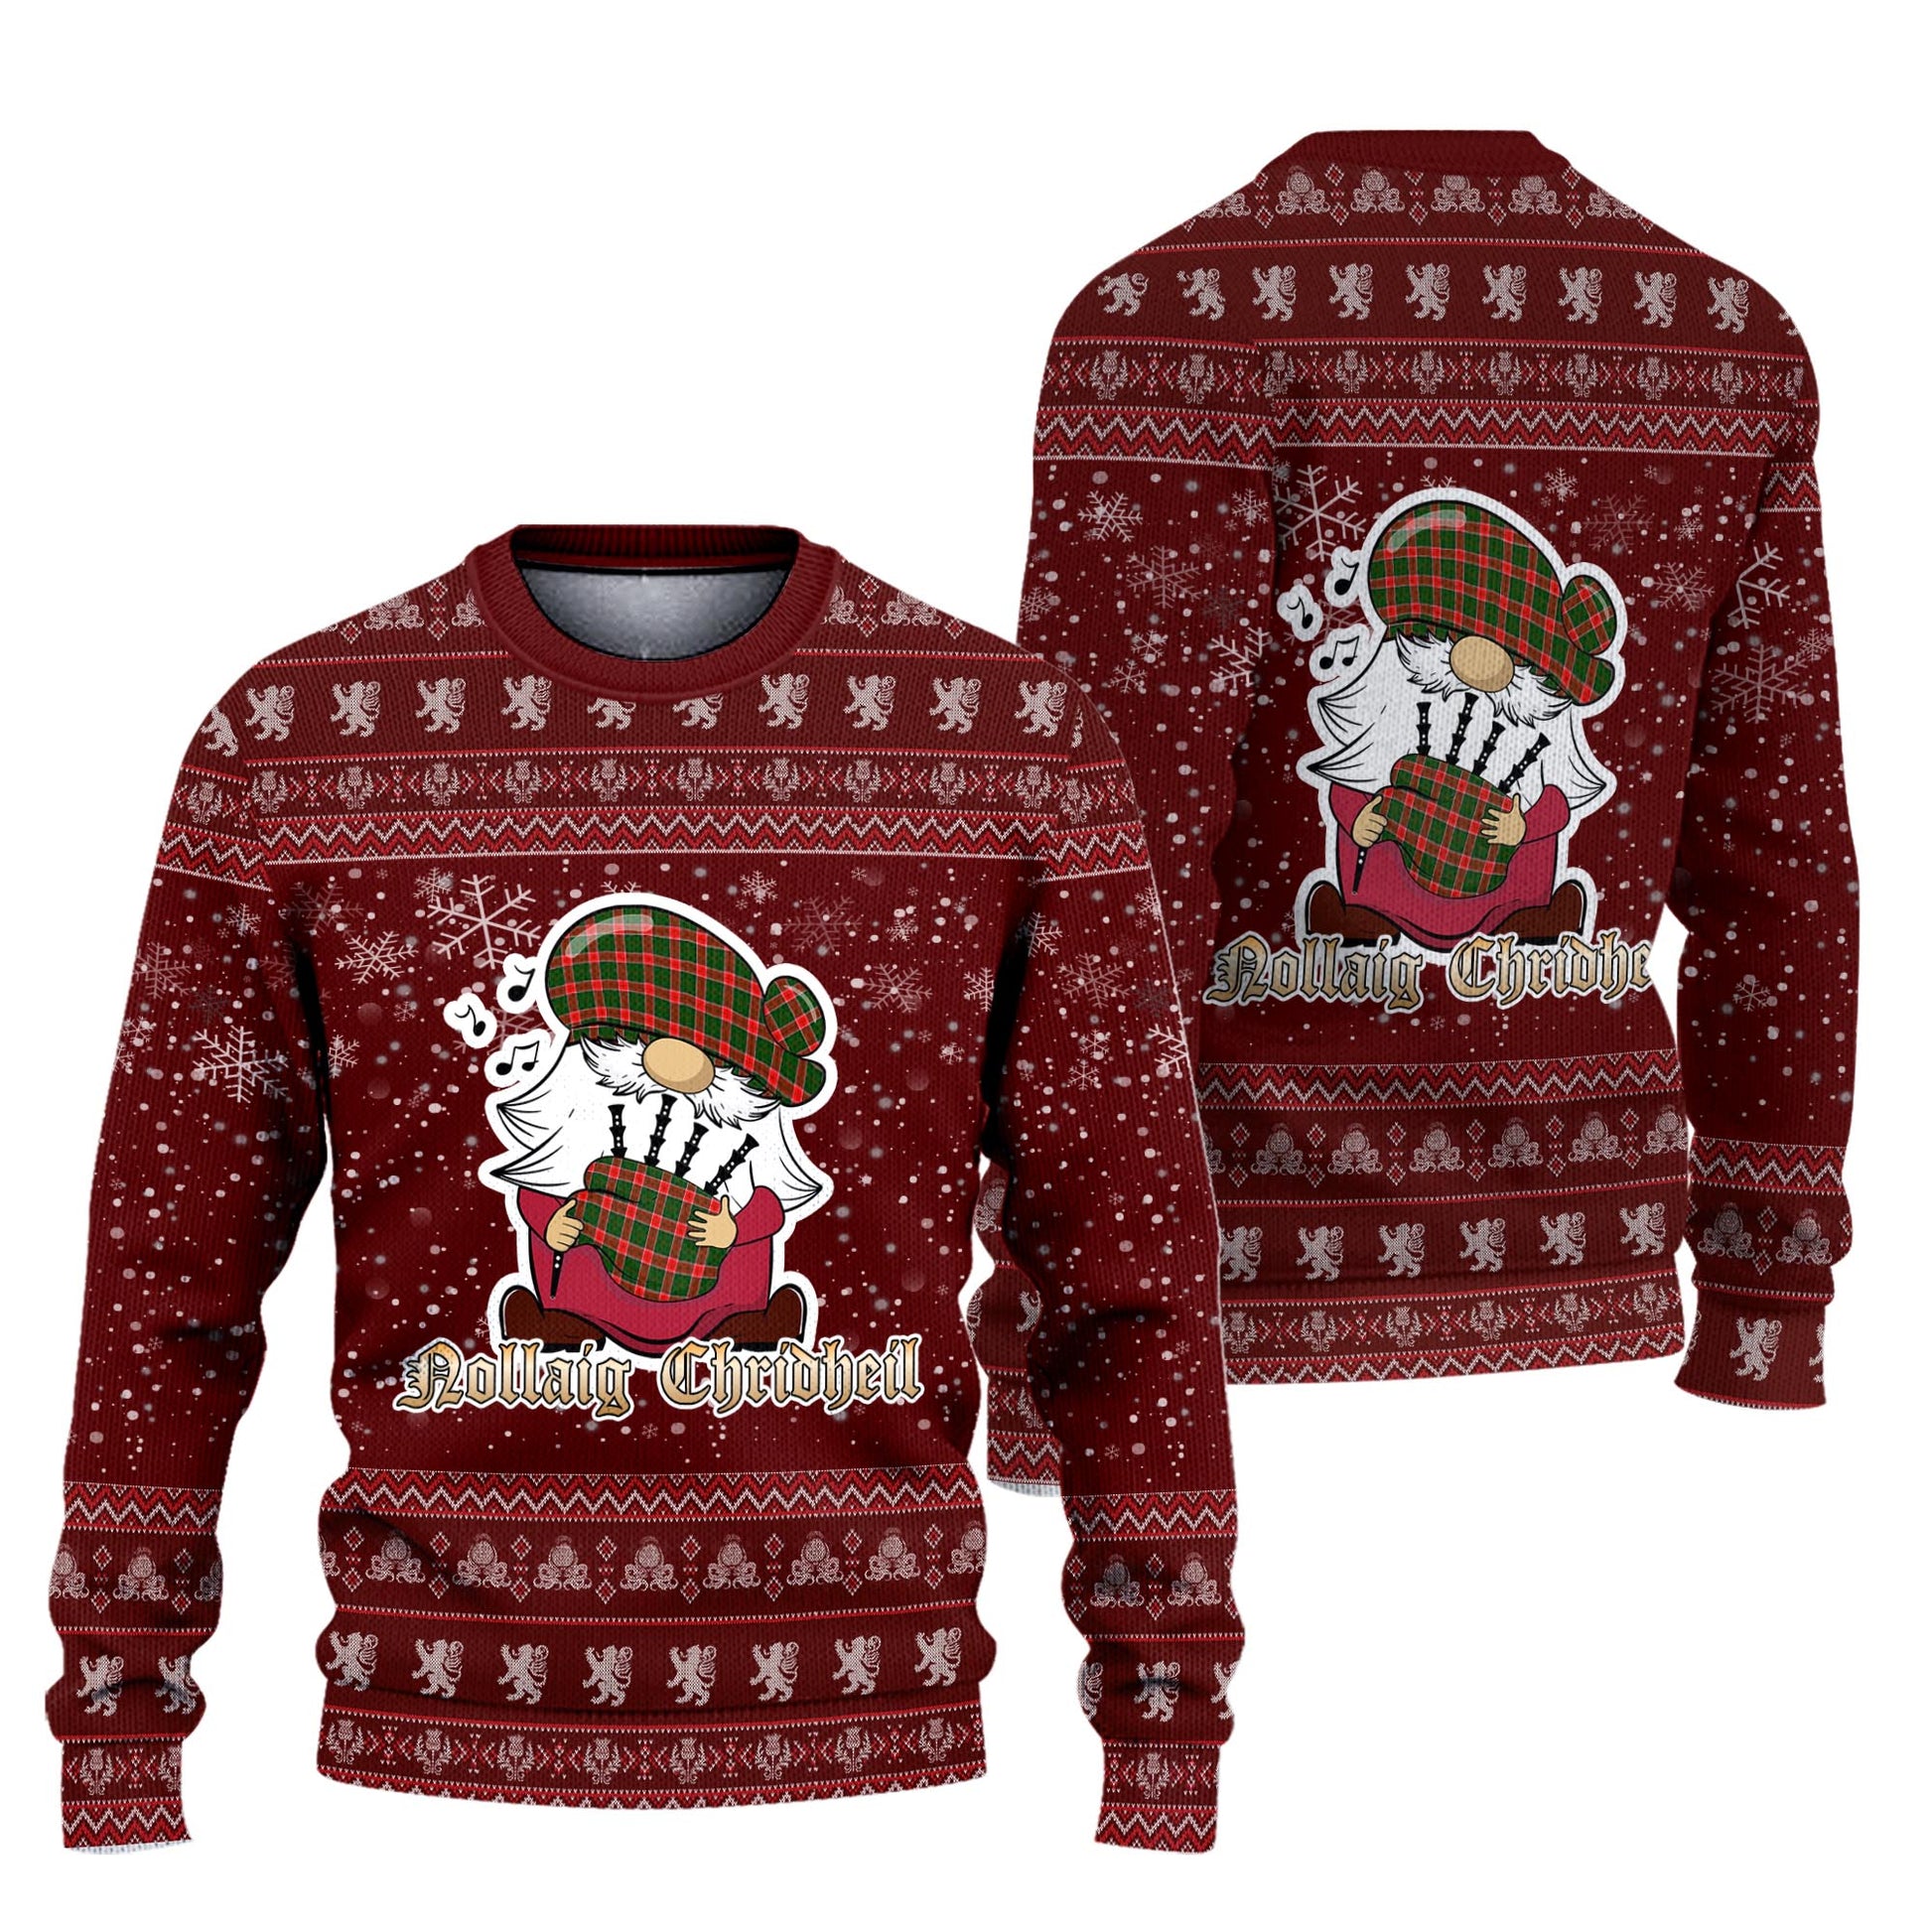 Pollock Modern Clan Christmas Family Knitted Sweater with Funny Gnome Playing Bagpipes Unisex Red - Tartanvibesclothing